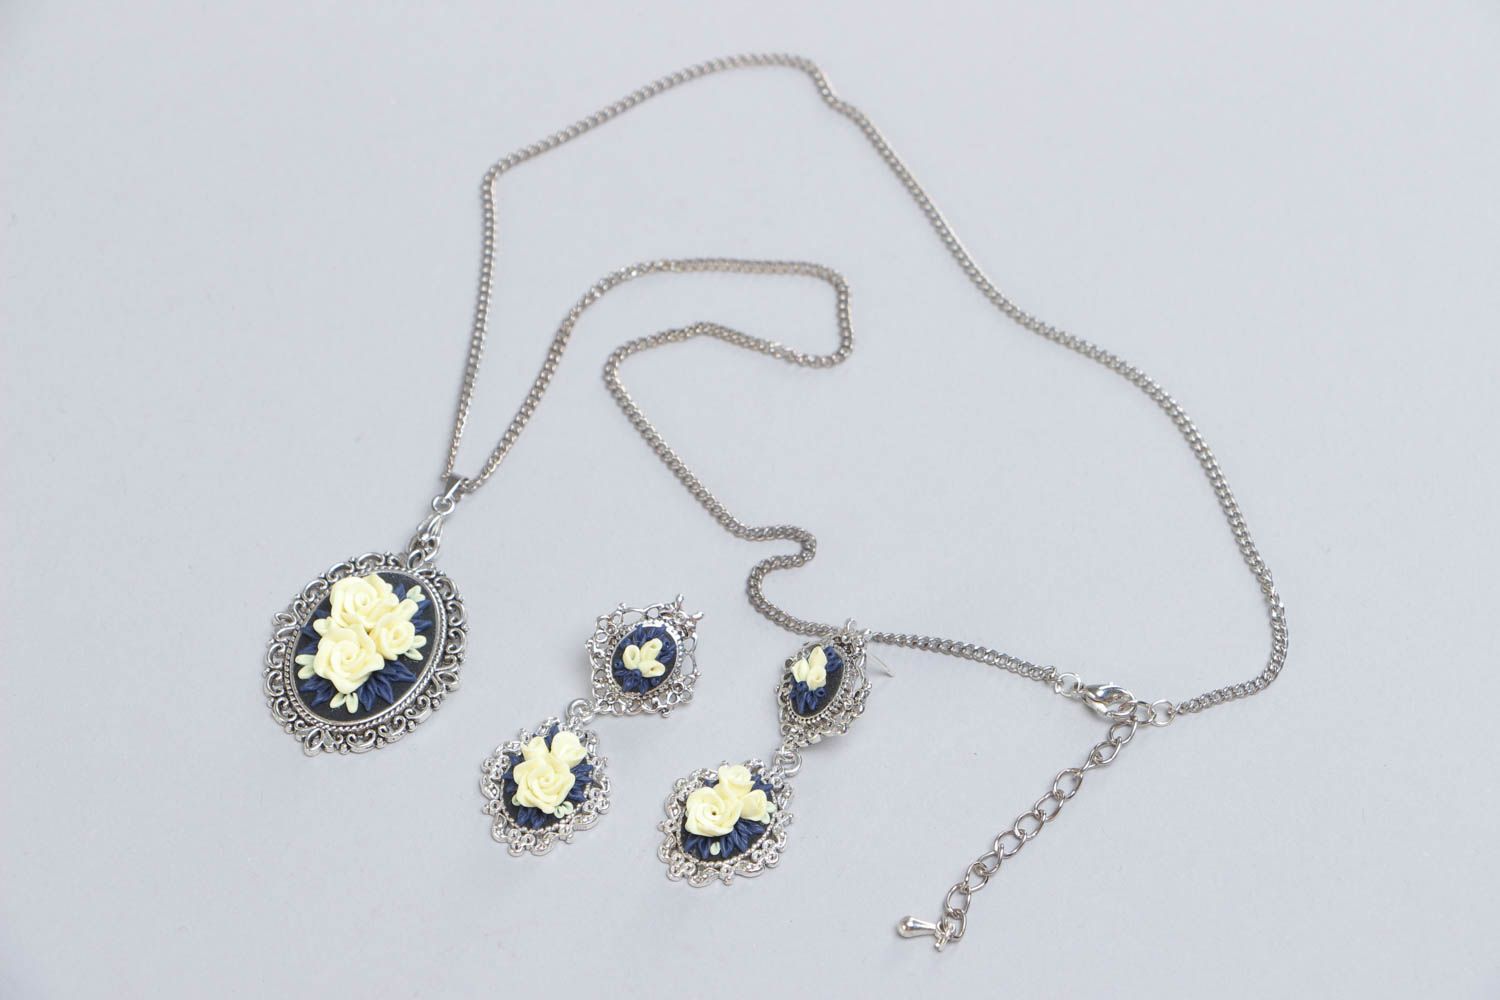 Handmade designer polymer clay jewelry set 2 items necklace and earrings Vanilla Roses photo 2